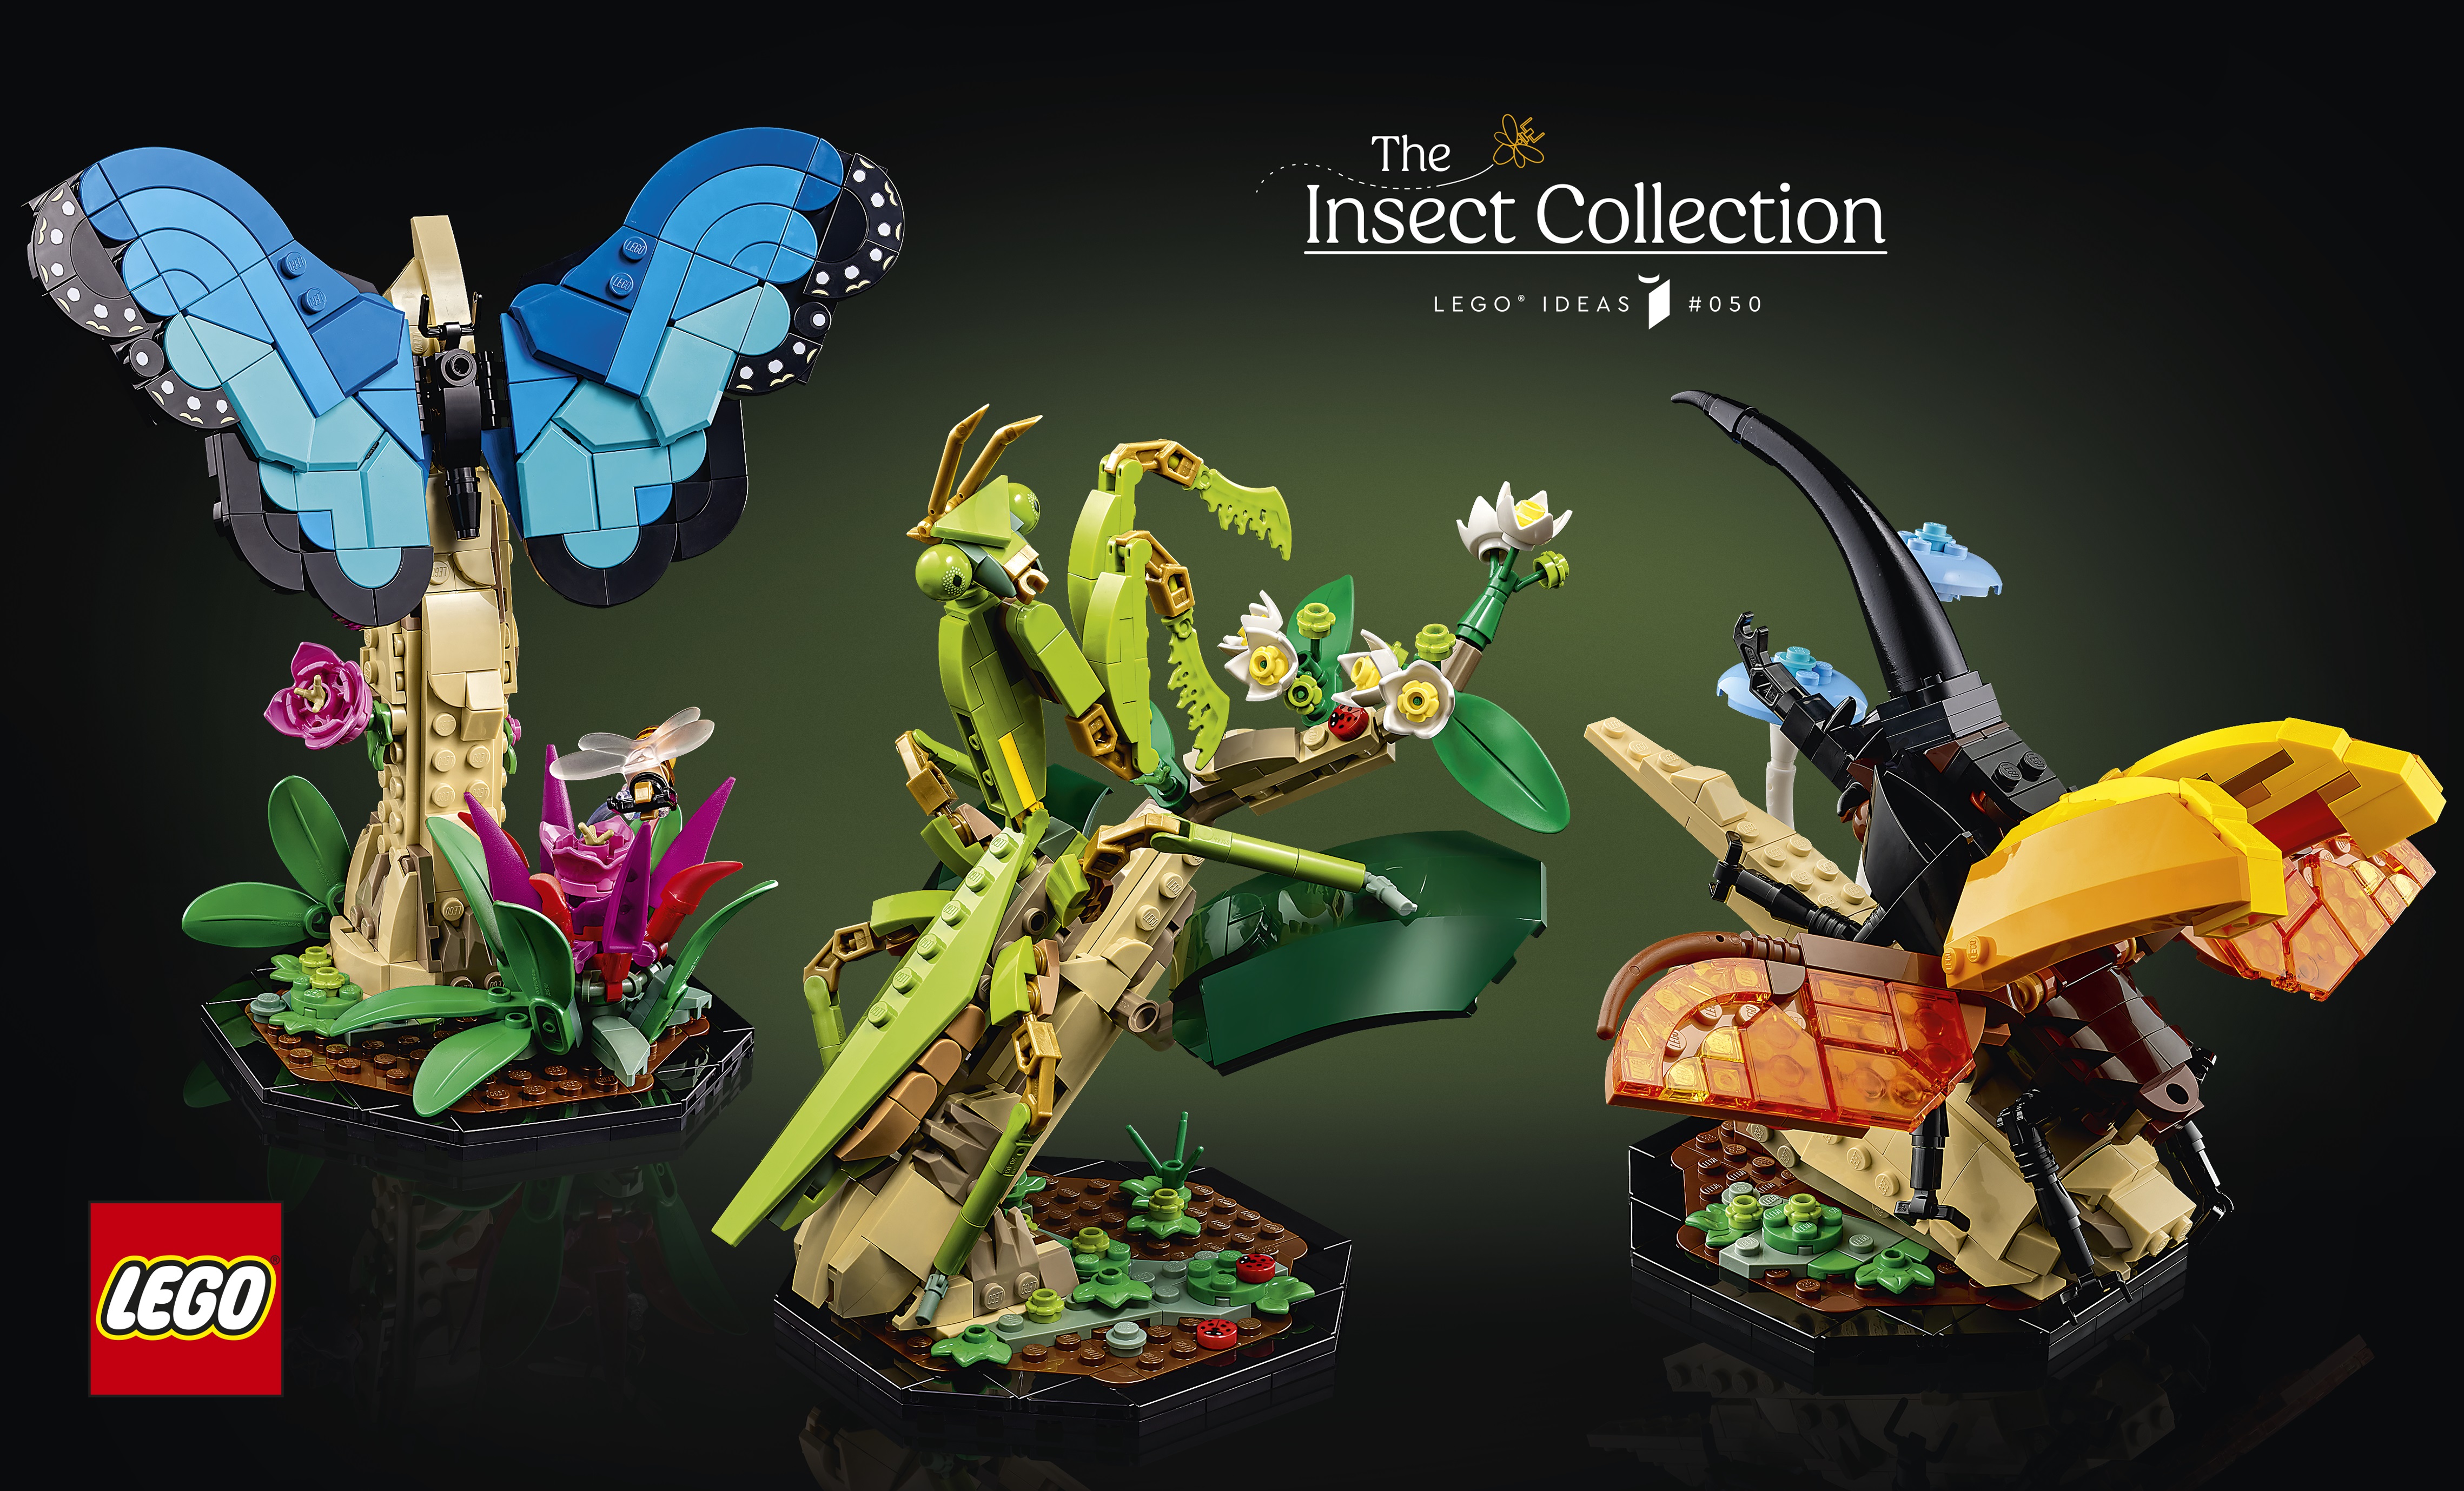 Build LEGO Bugs with 21342 The Insect Collection! - Jay's Brick Blog